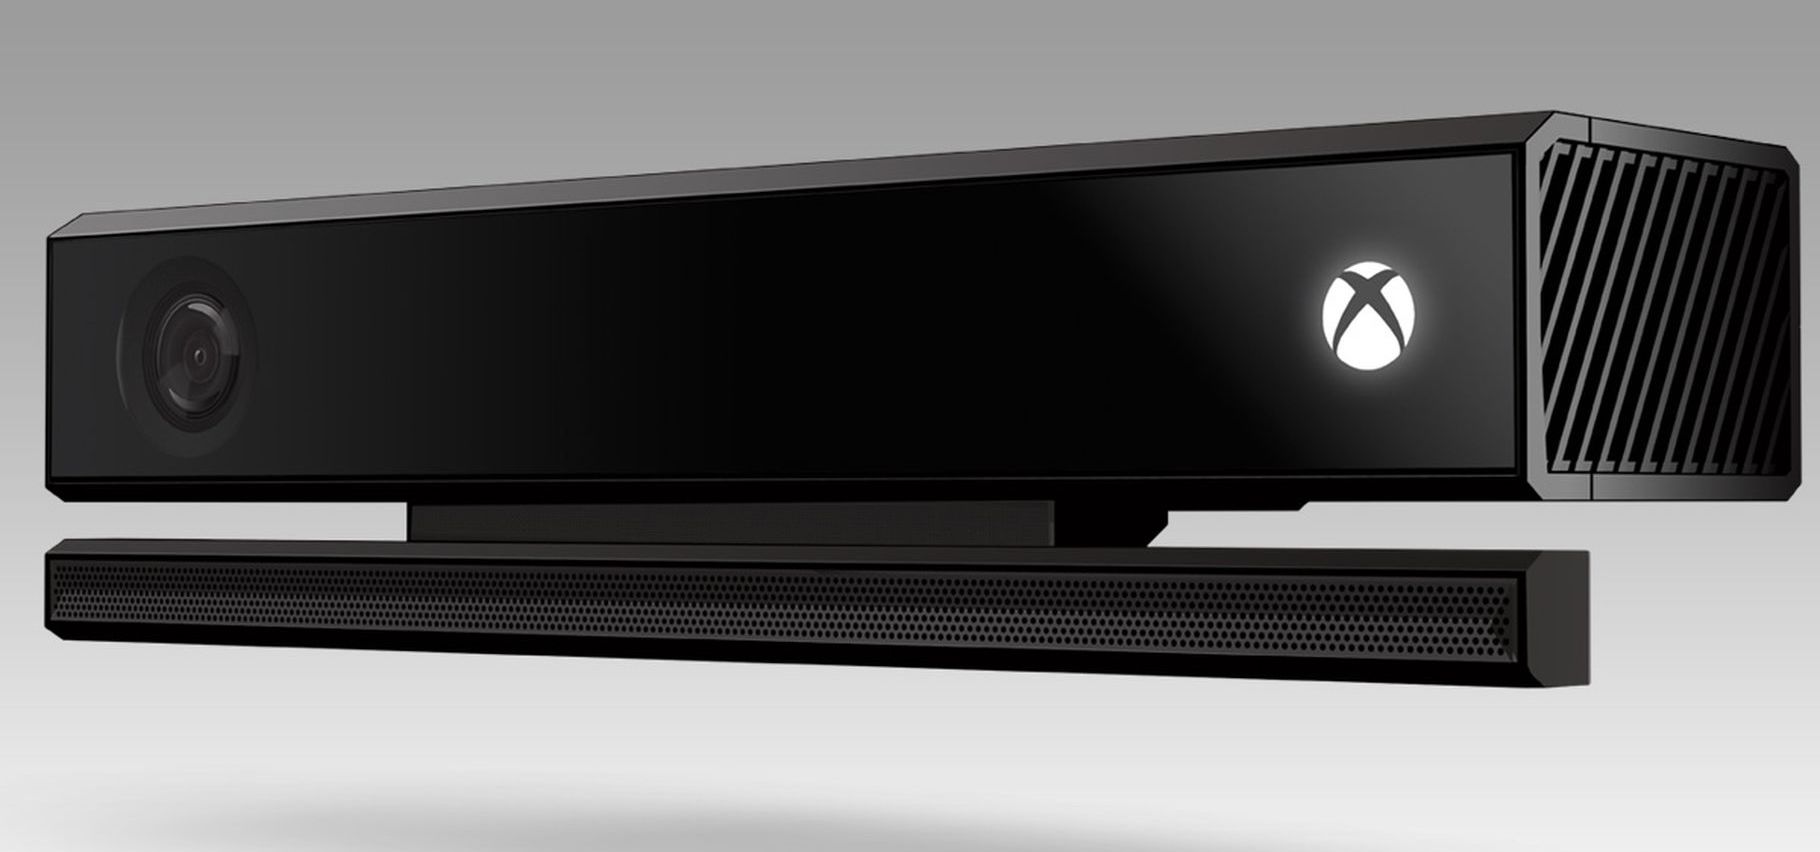 Microsoft Kinect for XBox One (2013)